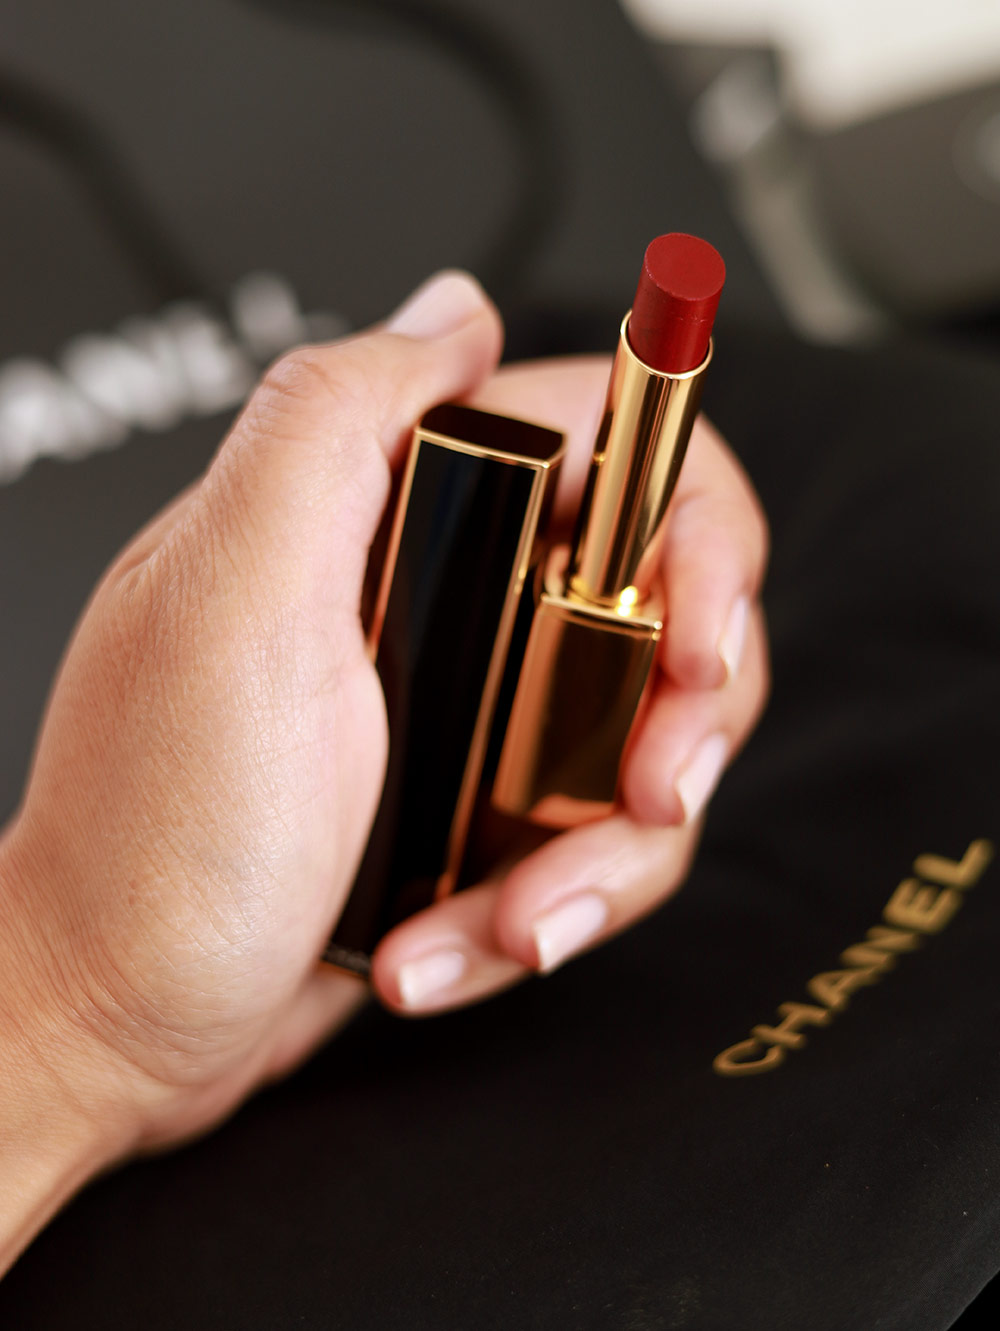 chanel limited edition lipstick